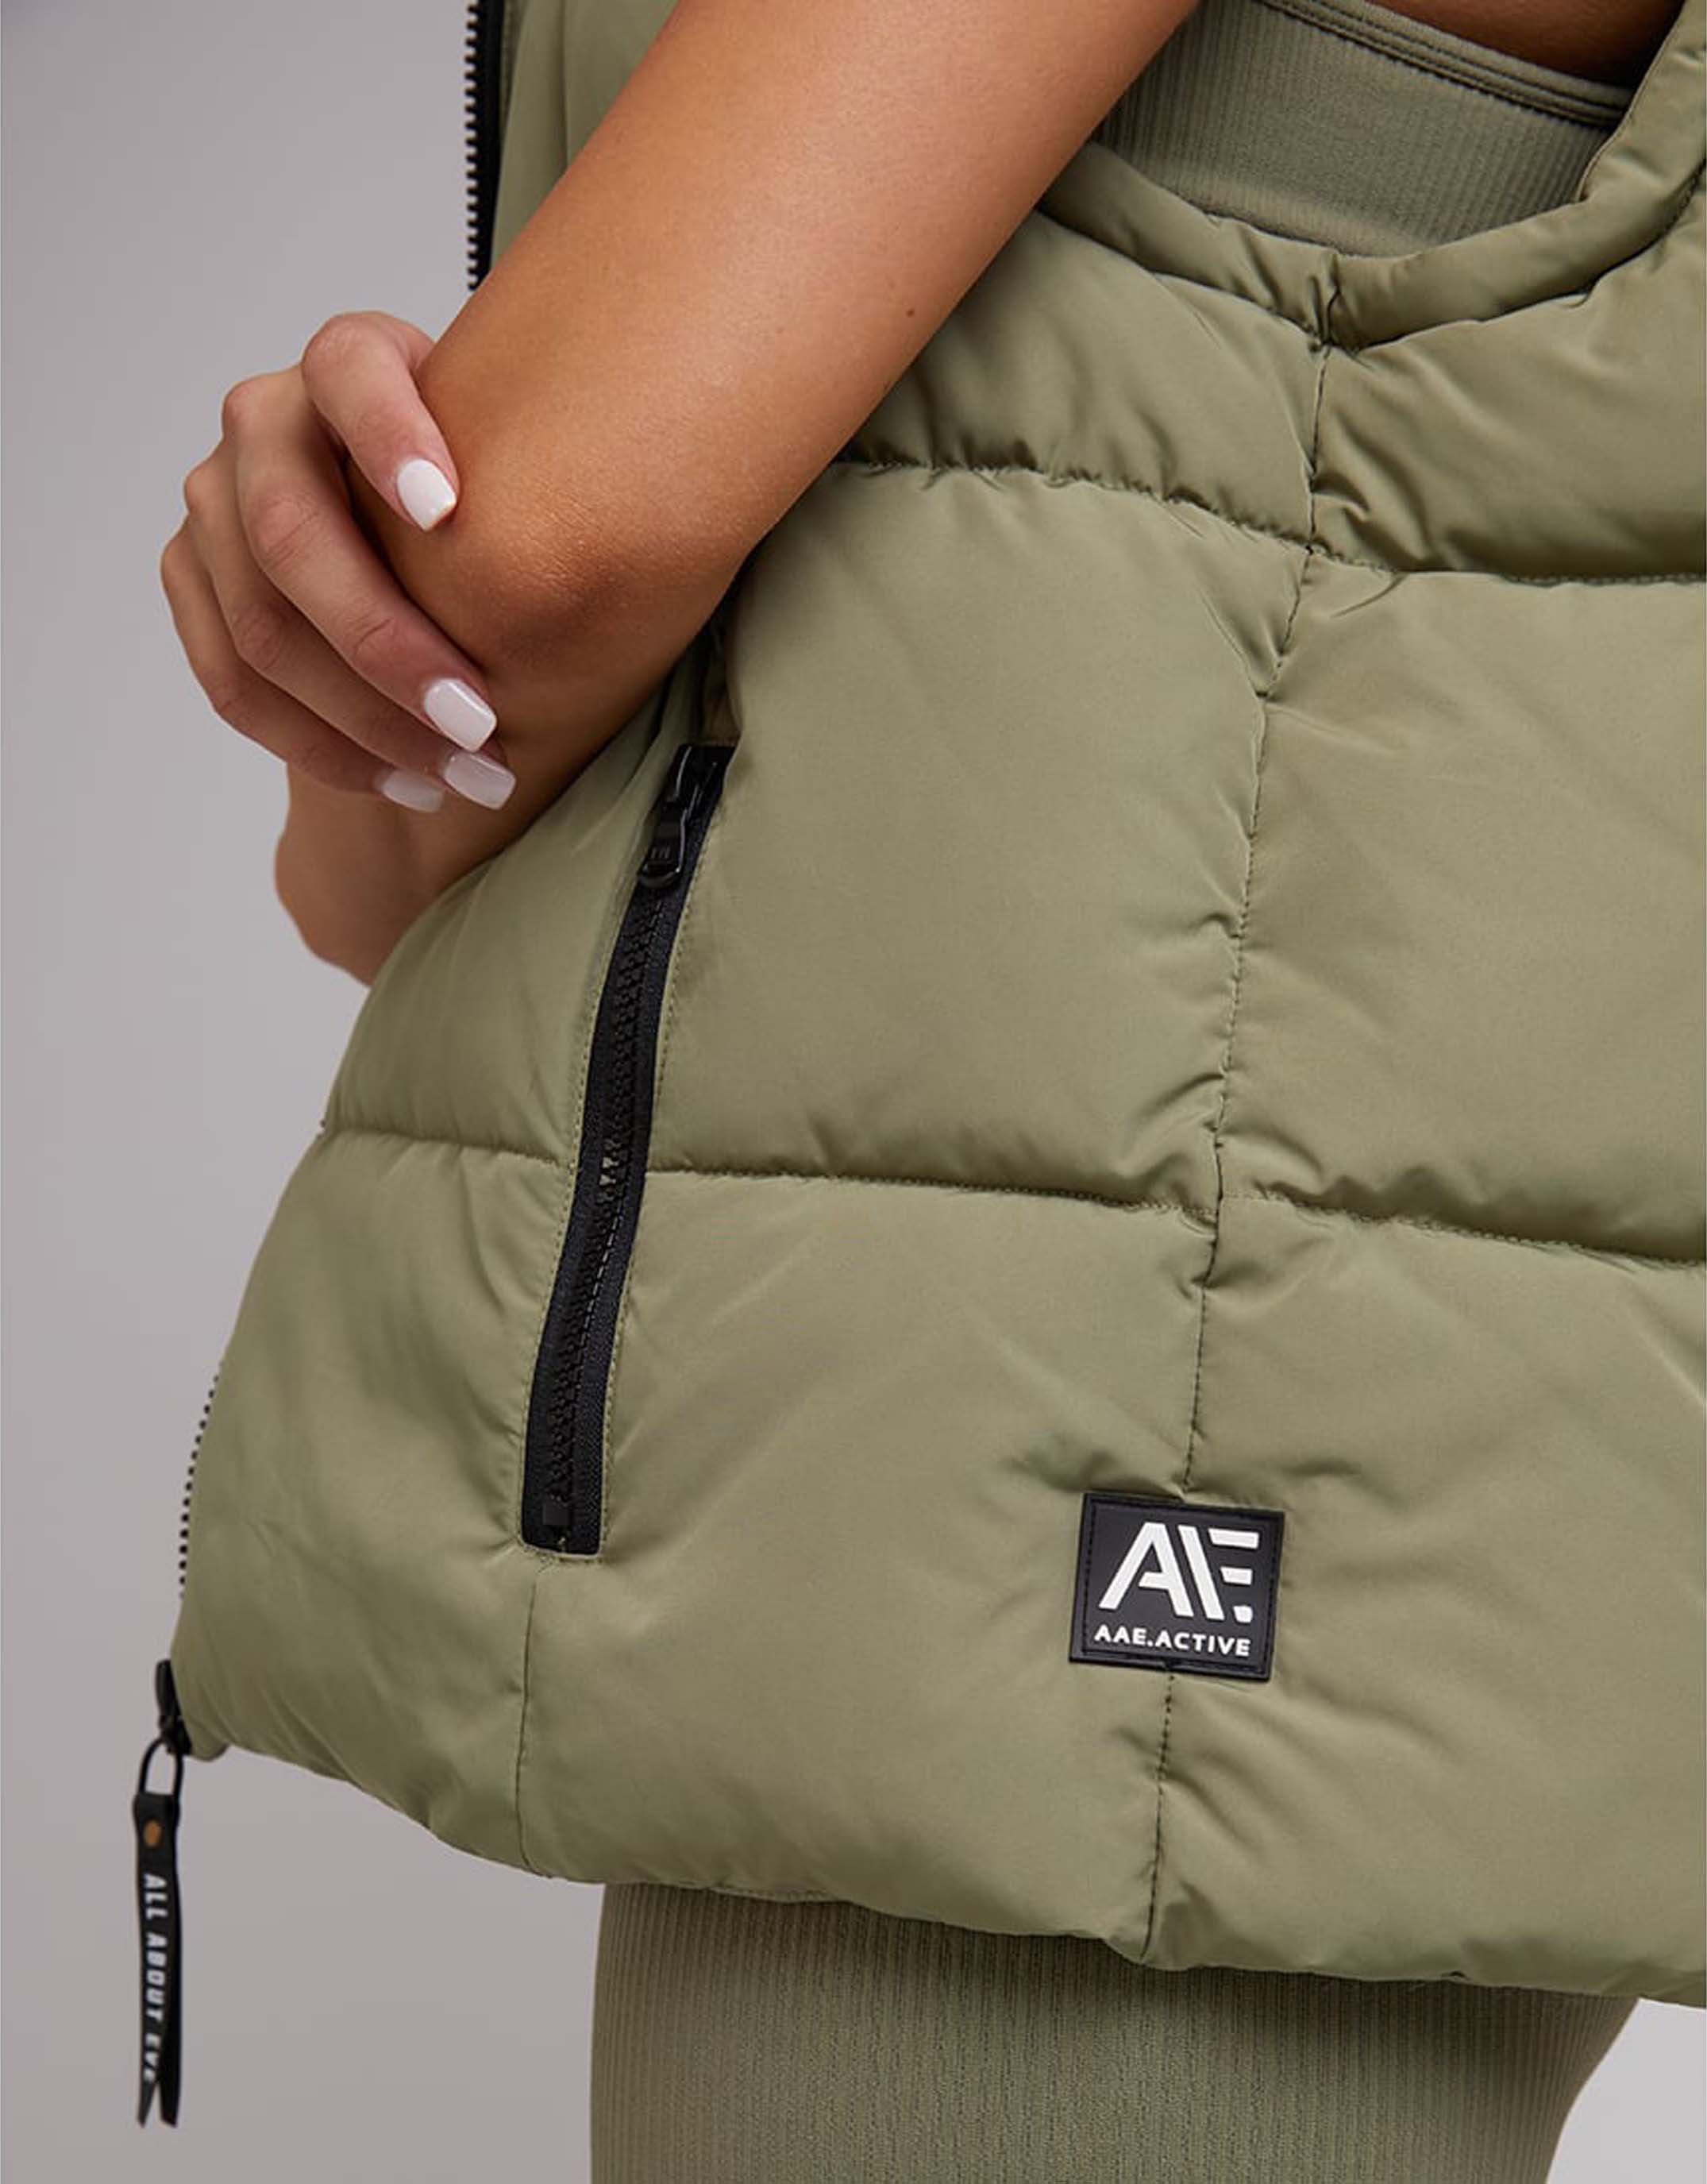 all-about-eve-remi-luxe-puffer-vest-khaki